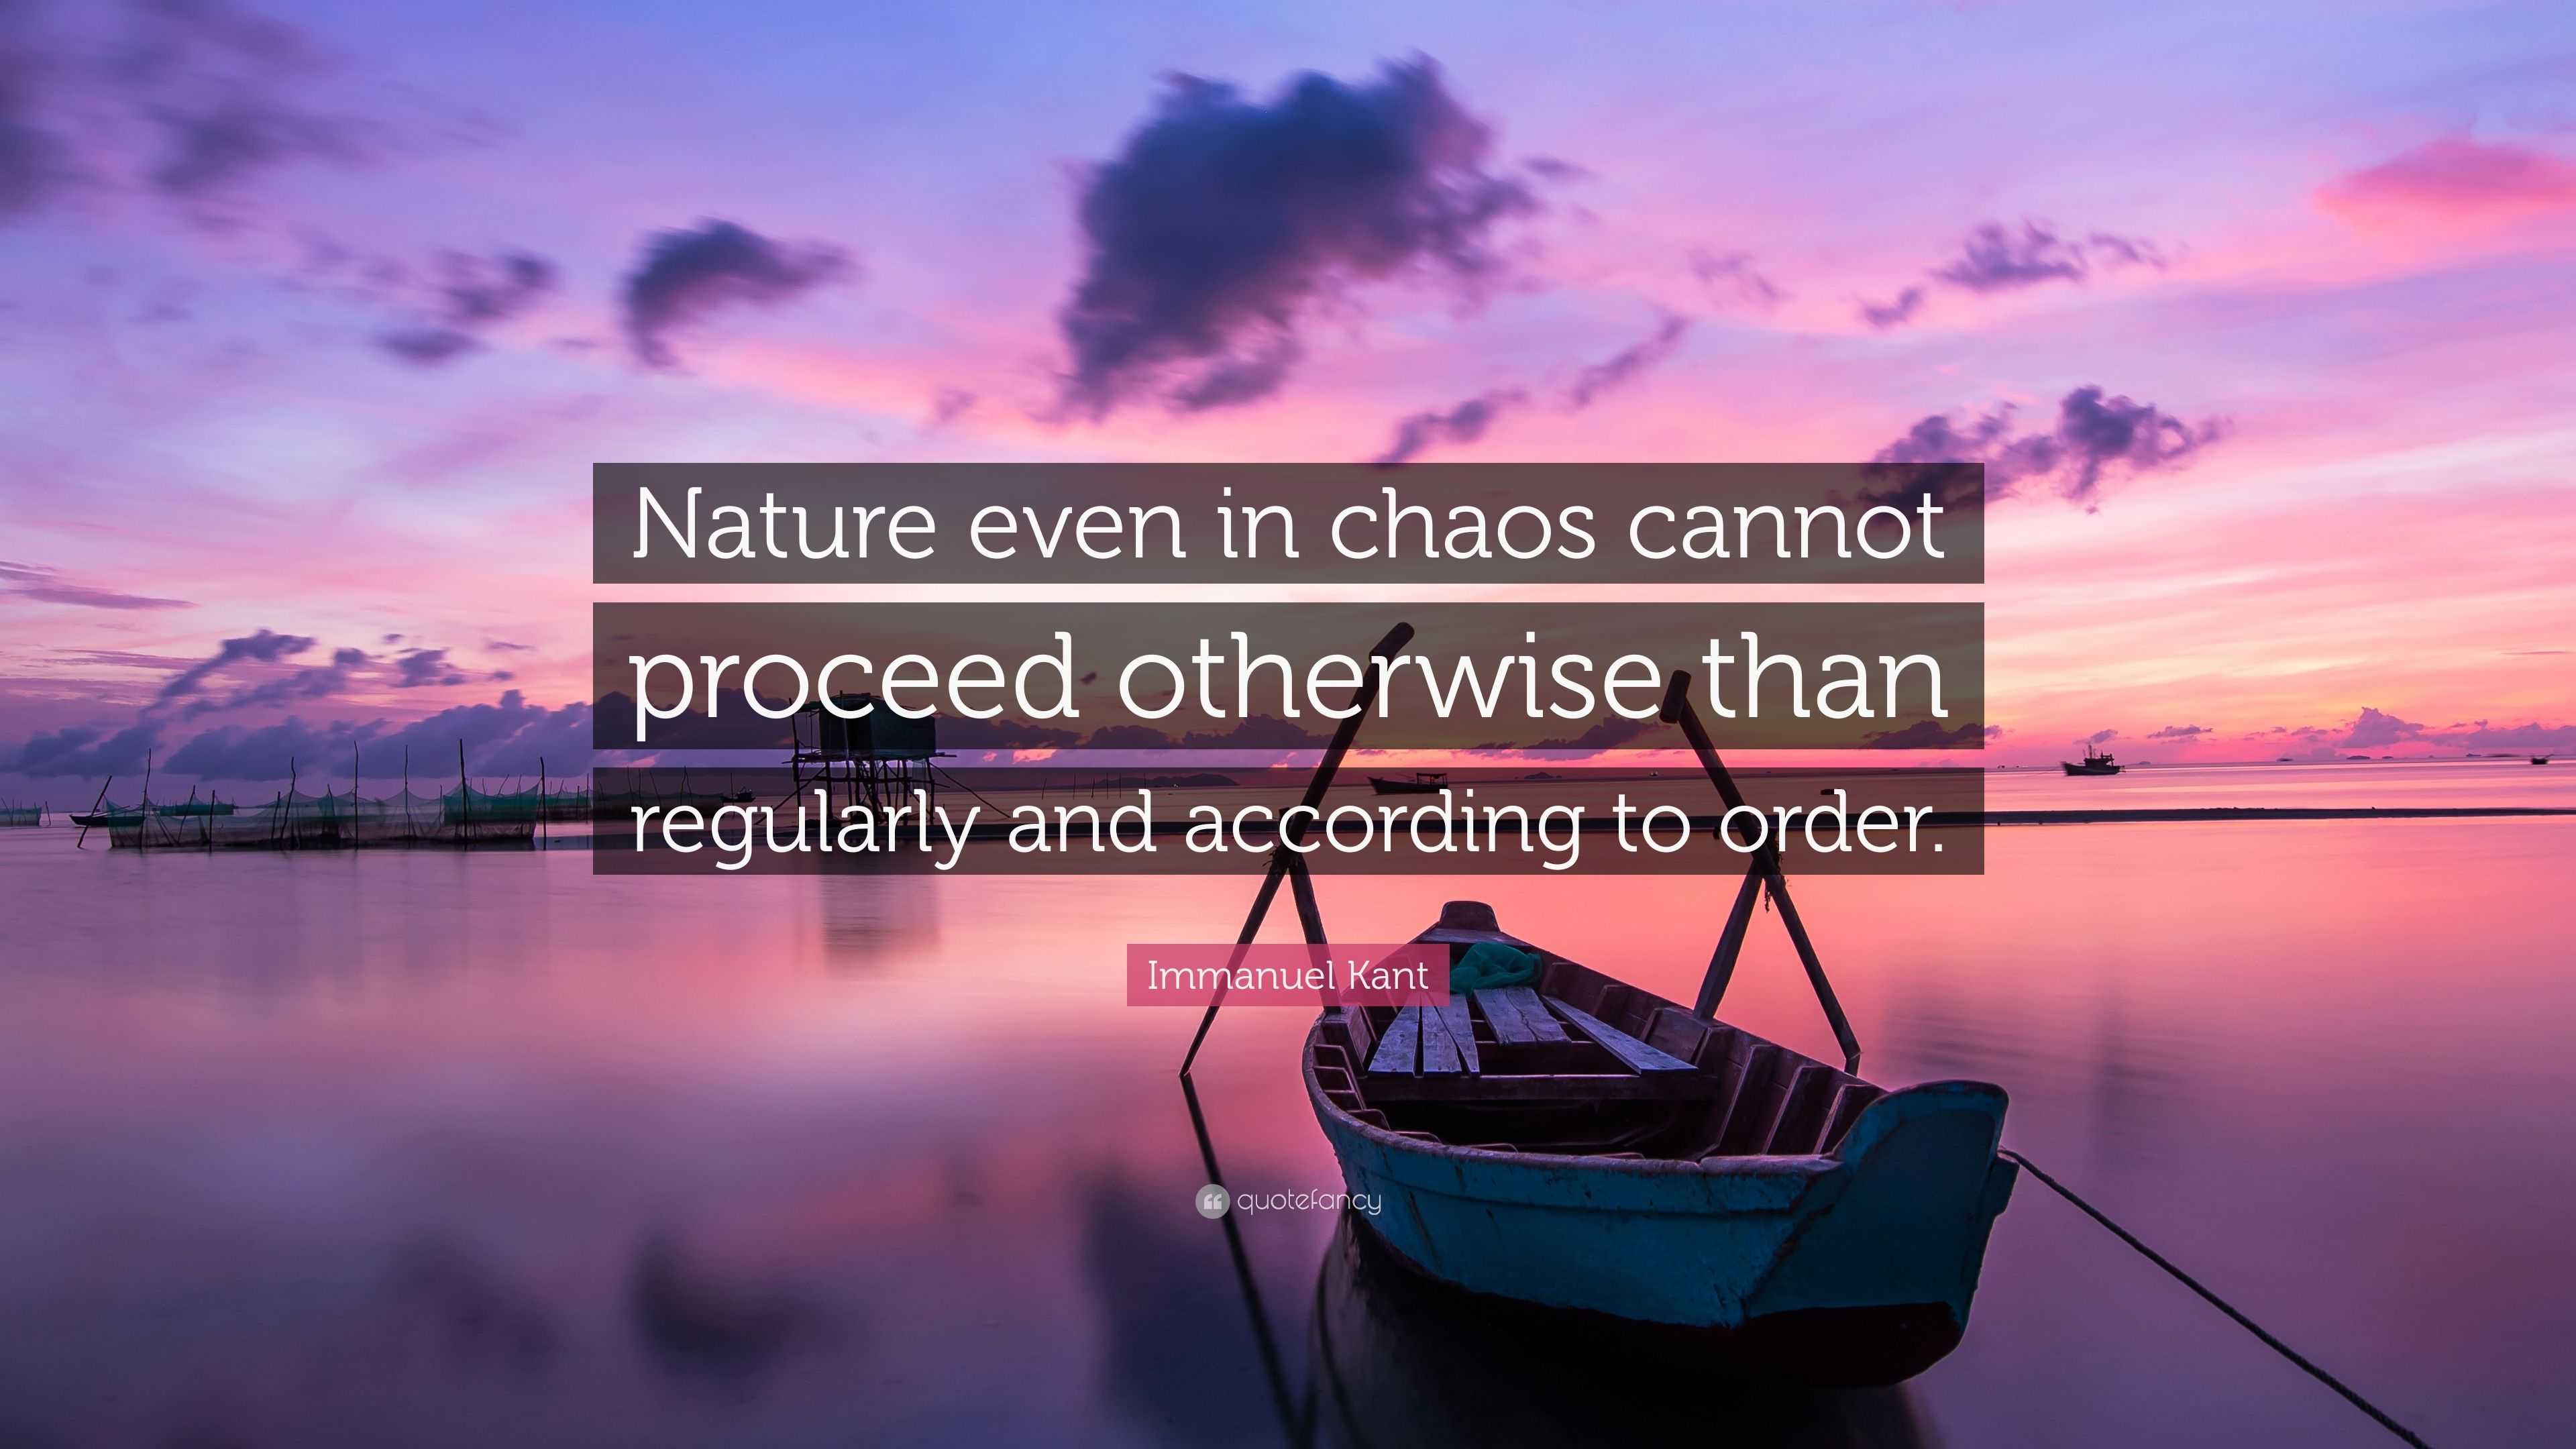 Immanuel Kant Quote: “Nature even in chaos cannot proceed otherwise